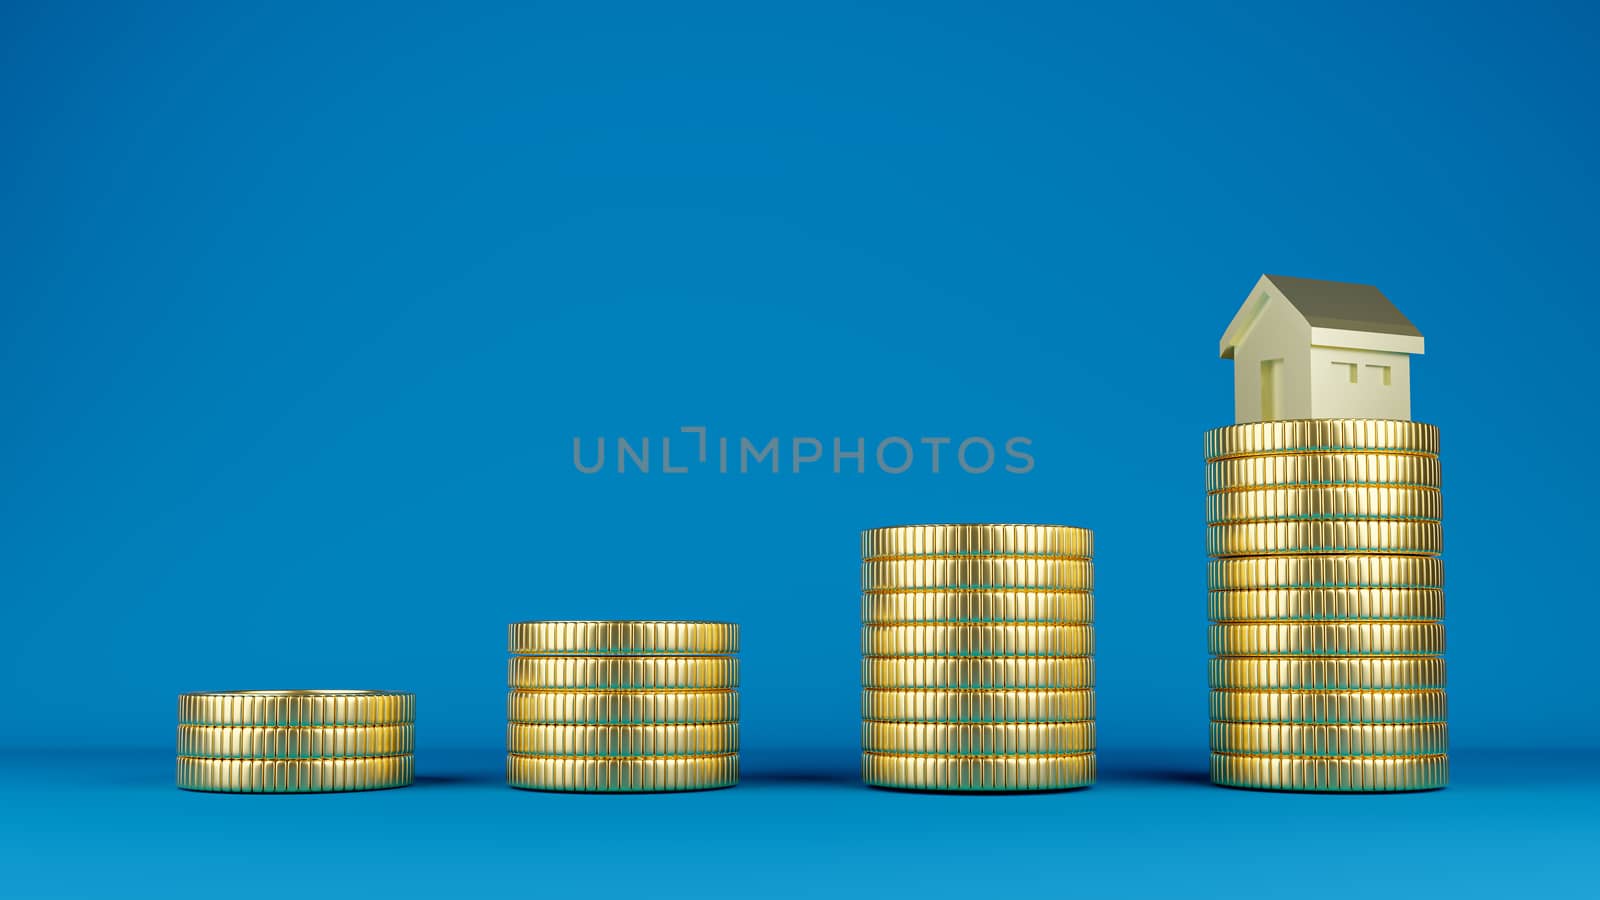 3D rendered image of stacks of gold coins with a gold house model.